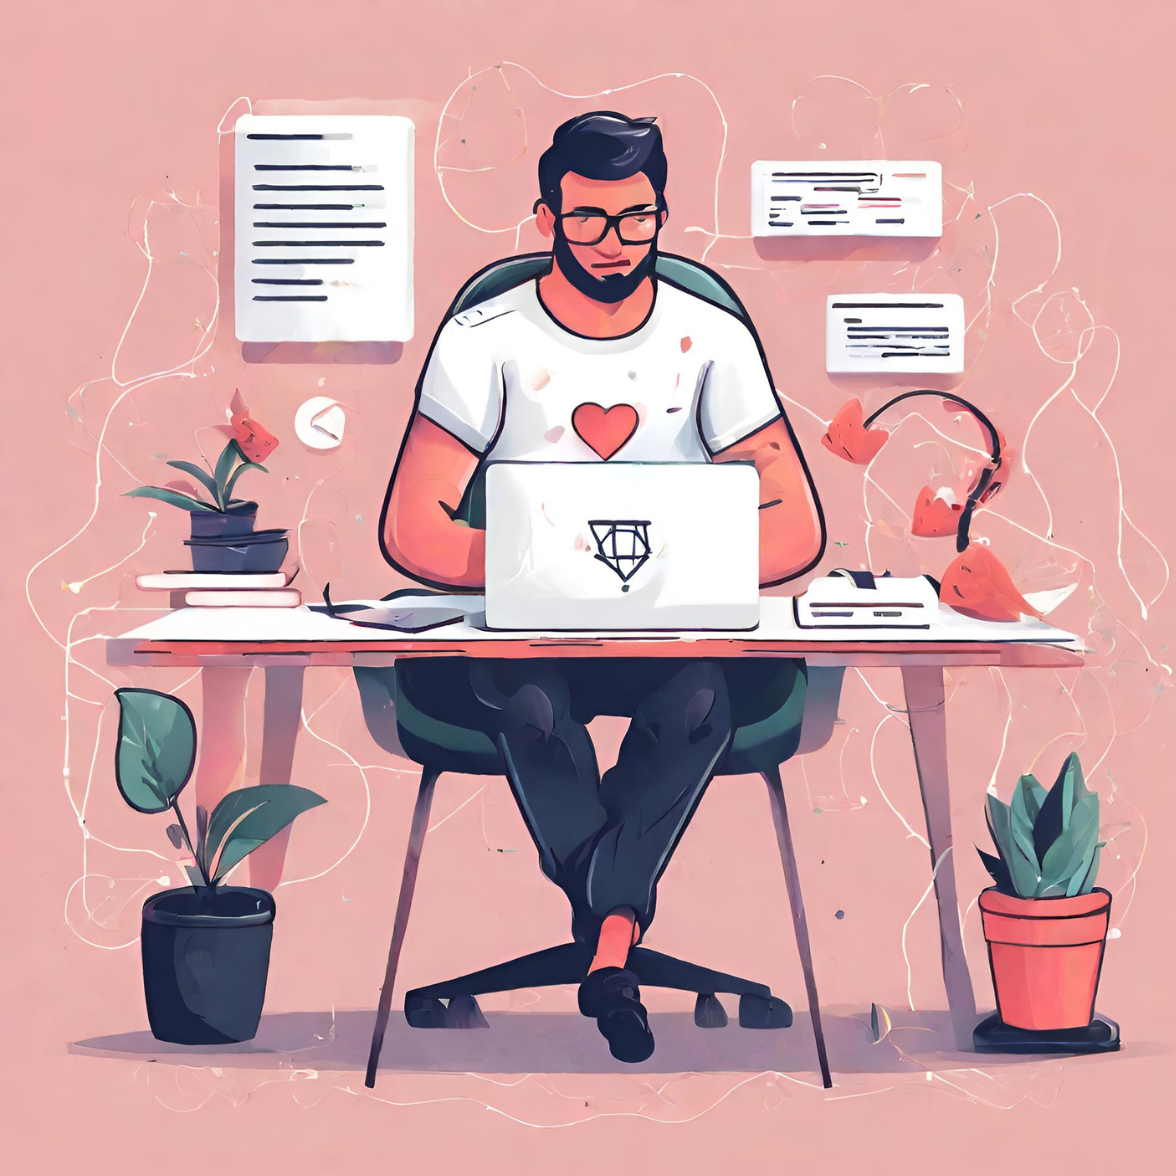 A web developer with a big heart, sitting at his desk, working on a laptop, creating websites for his clients.